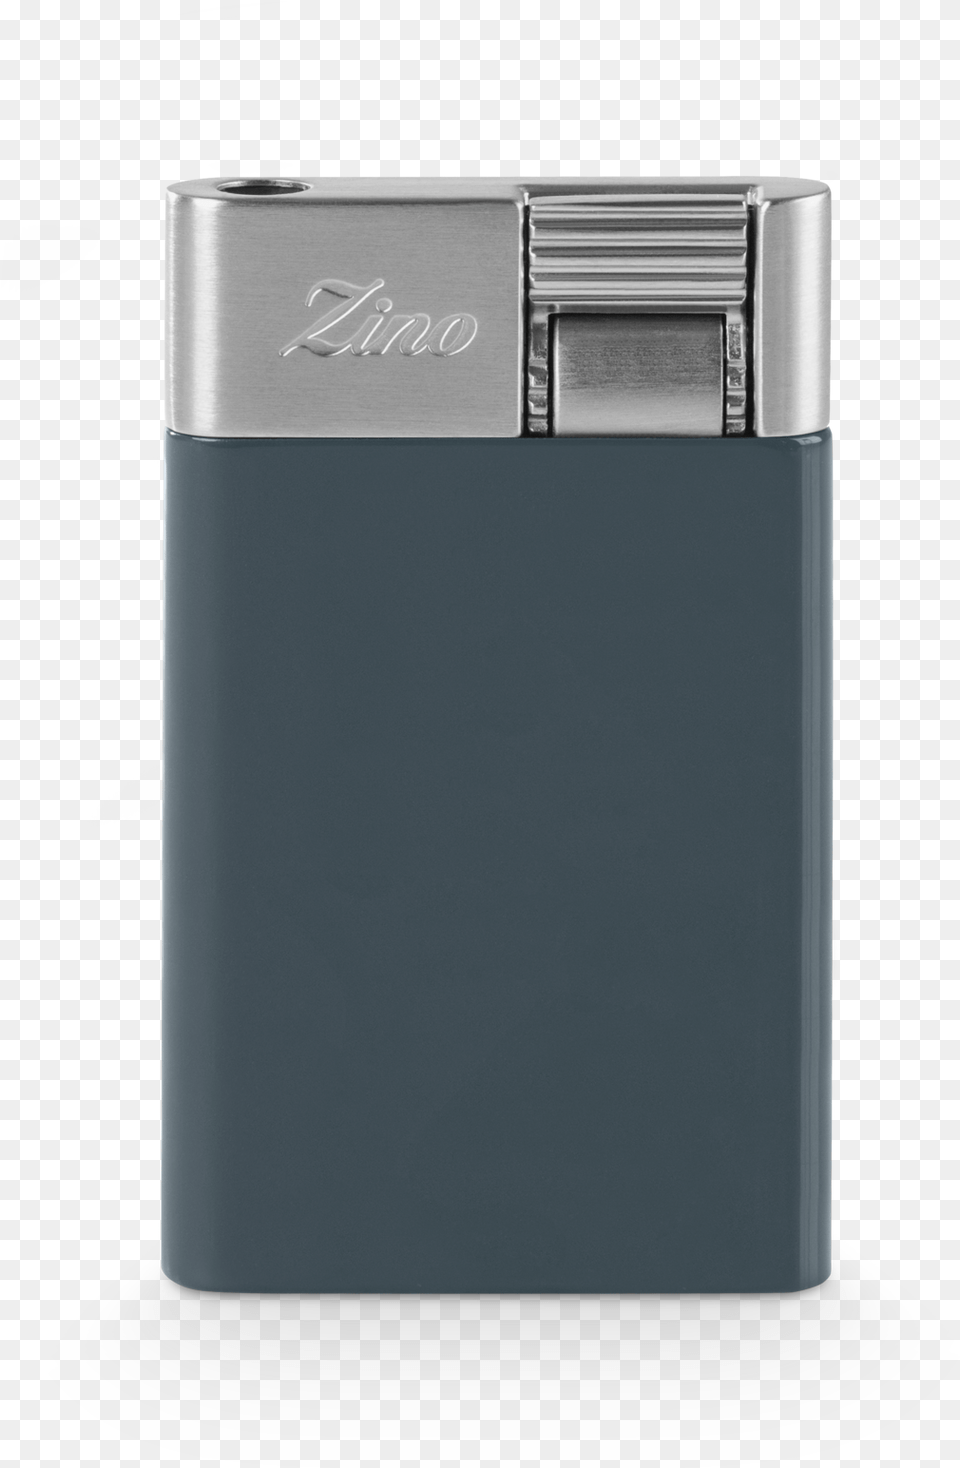 0 Home Appliance, Lighter, Can, Tin Png Image